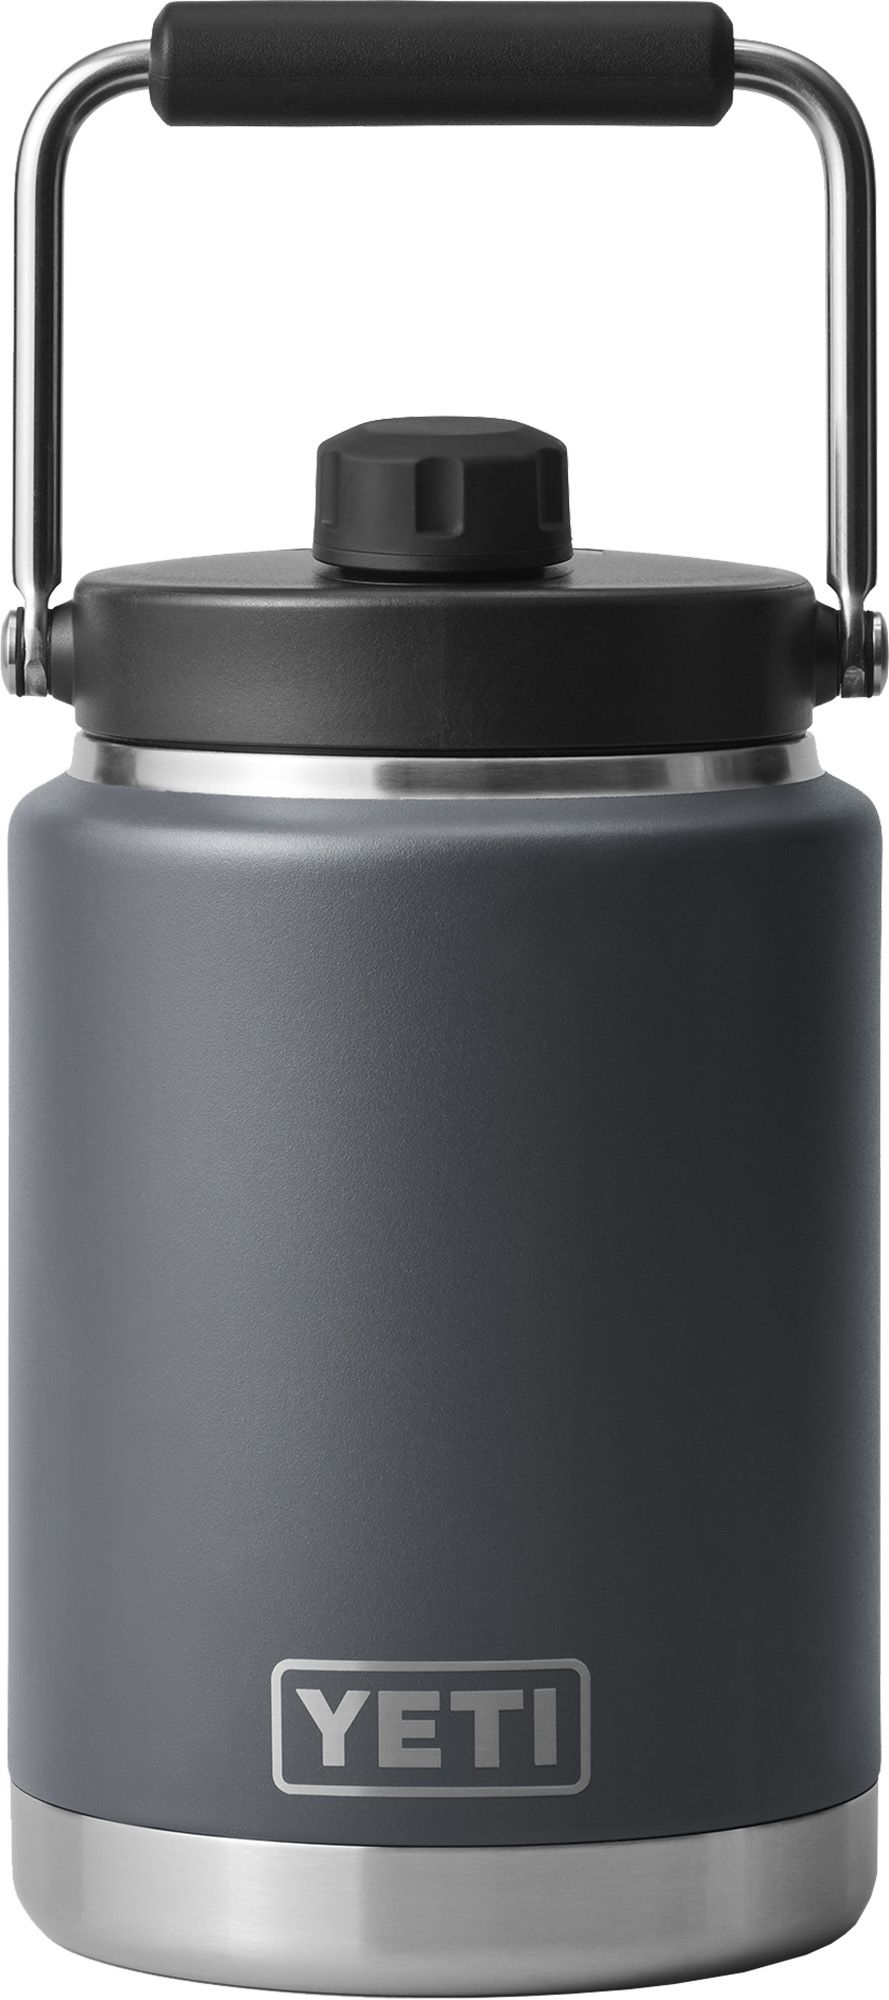  Stanley Stay-Chill Classic Pitcher 64oz Charcoal Glow :  Everything Else